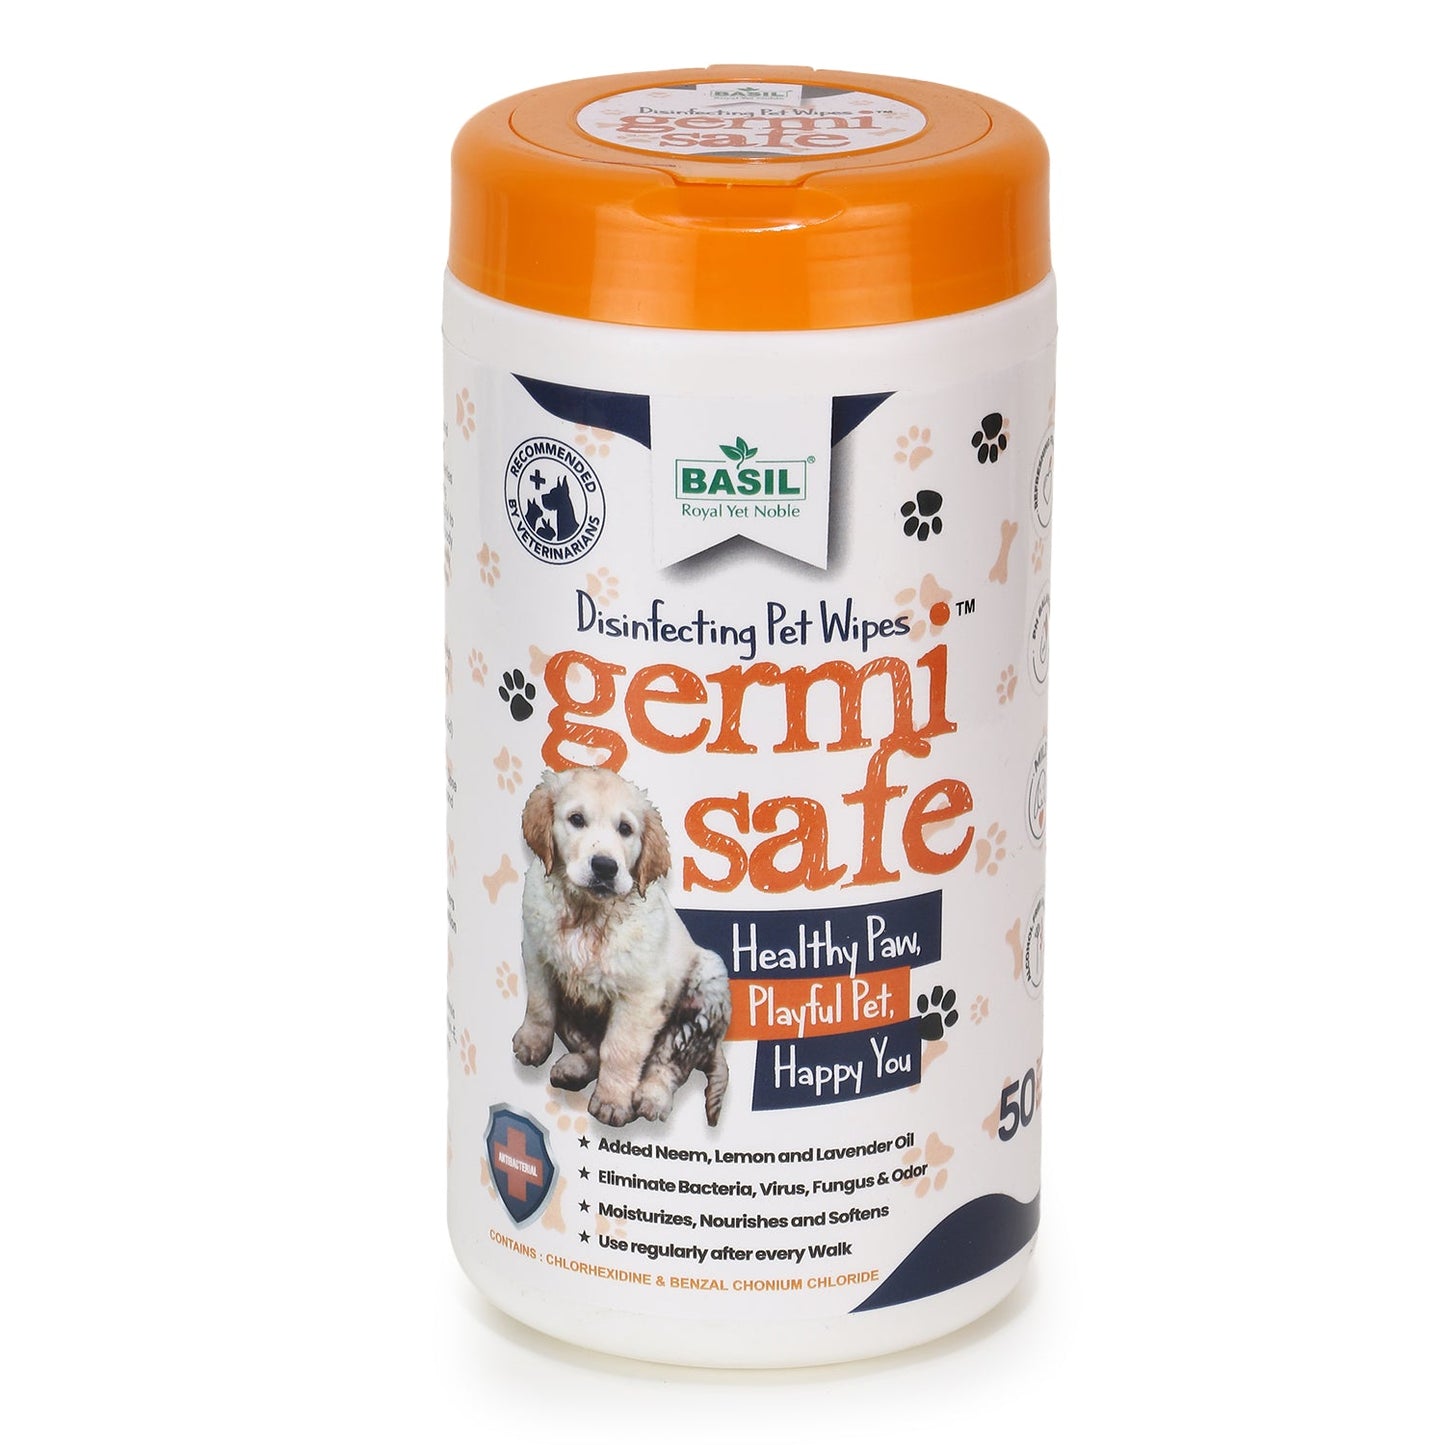 Basil Anti-Bacterial Pet Wipes for Dogs & Cats, 50 Wipes with Added Neem, Lemon and Lavender Oil